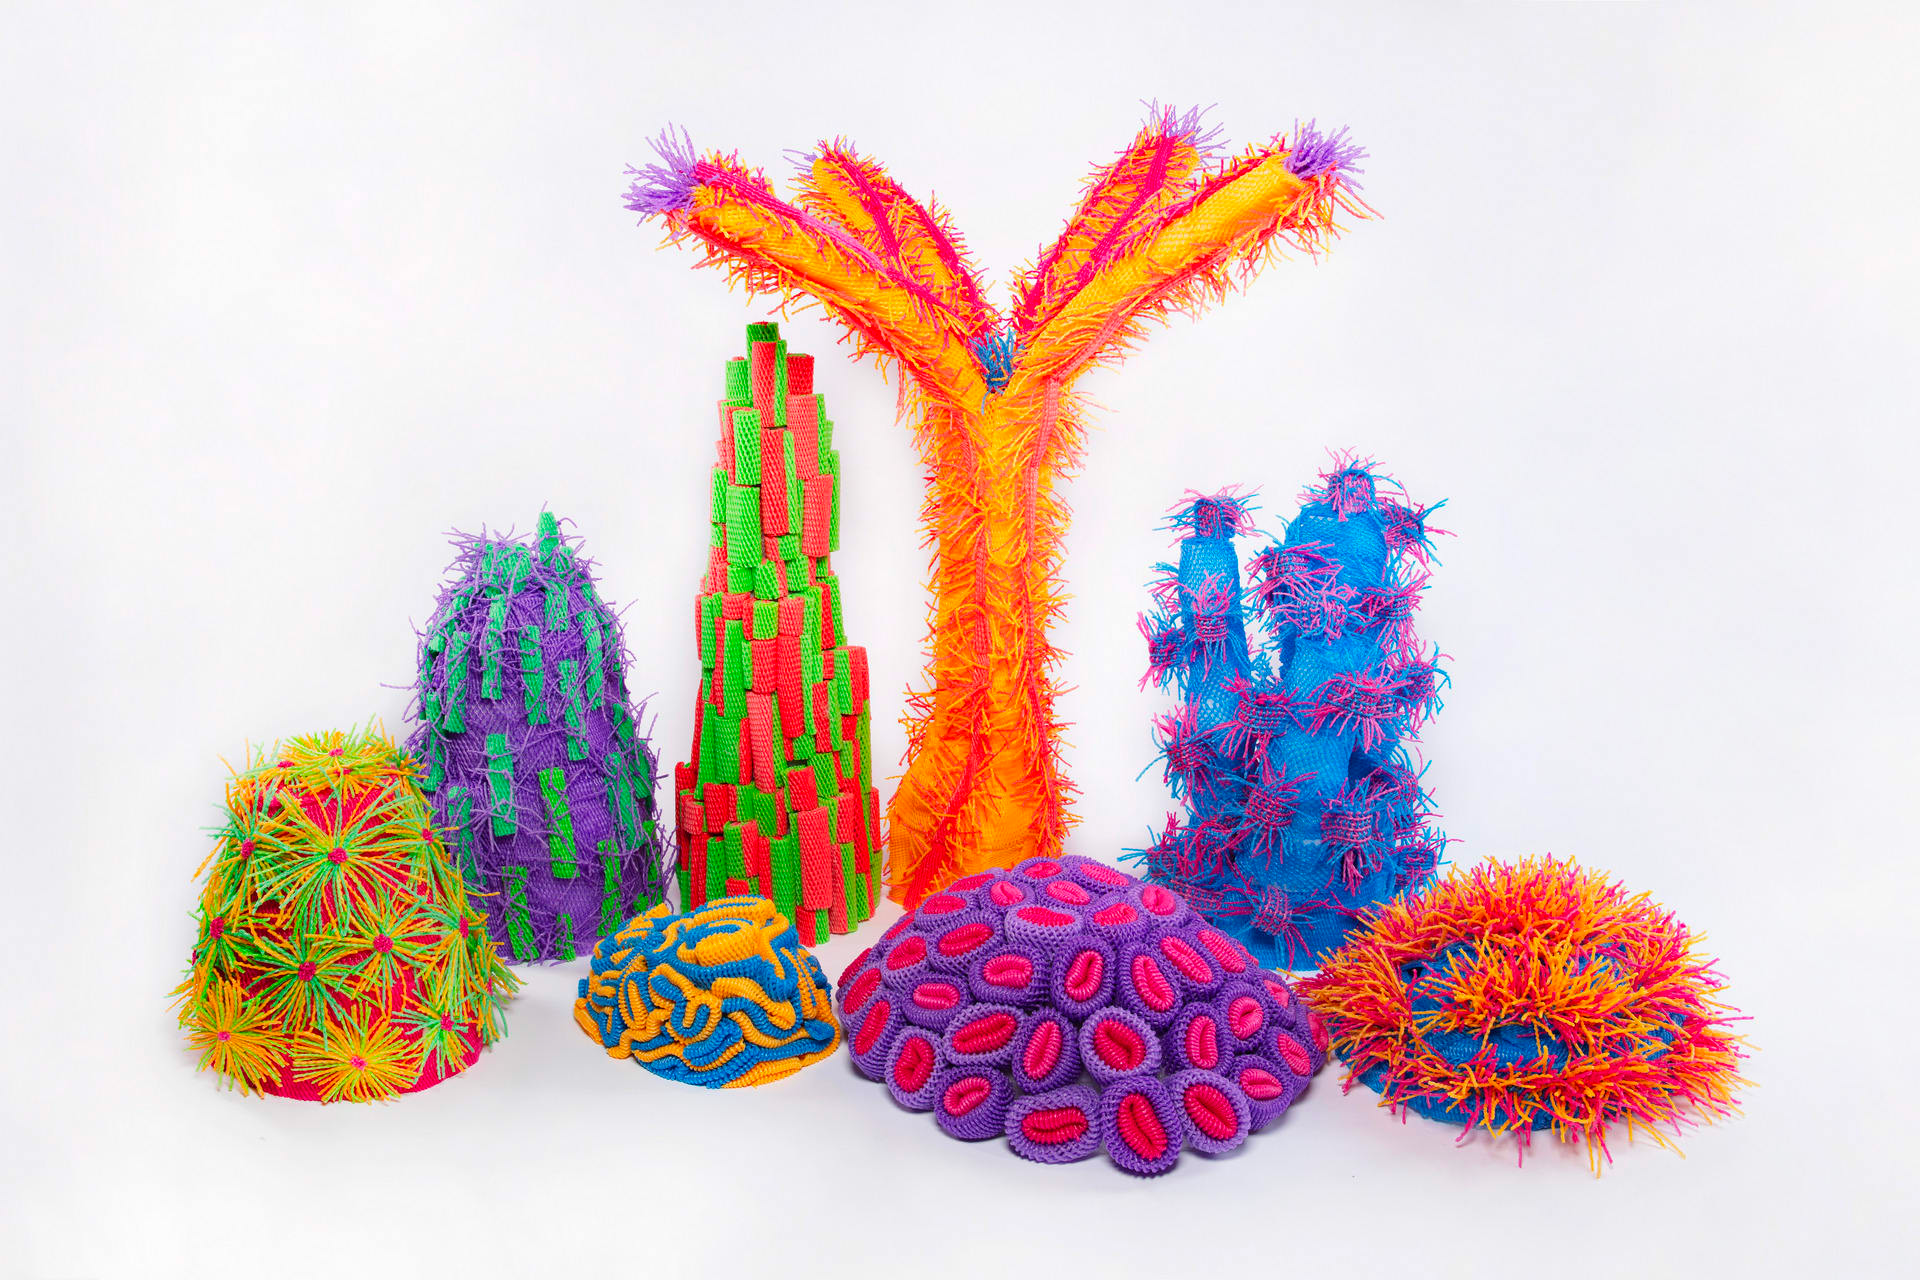 Image of a group of structures, in very bright colours, including purple, orange and green, which resemble marine plants, on a white background.